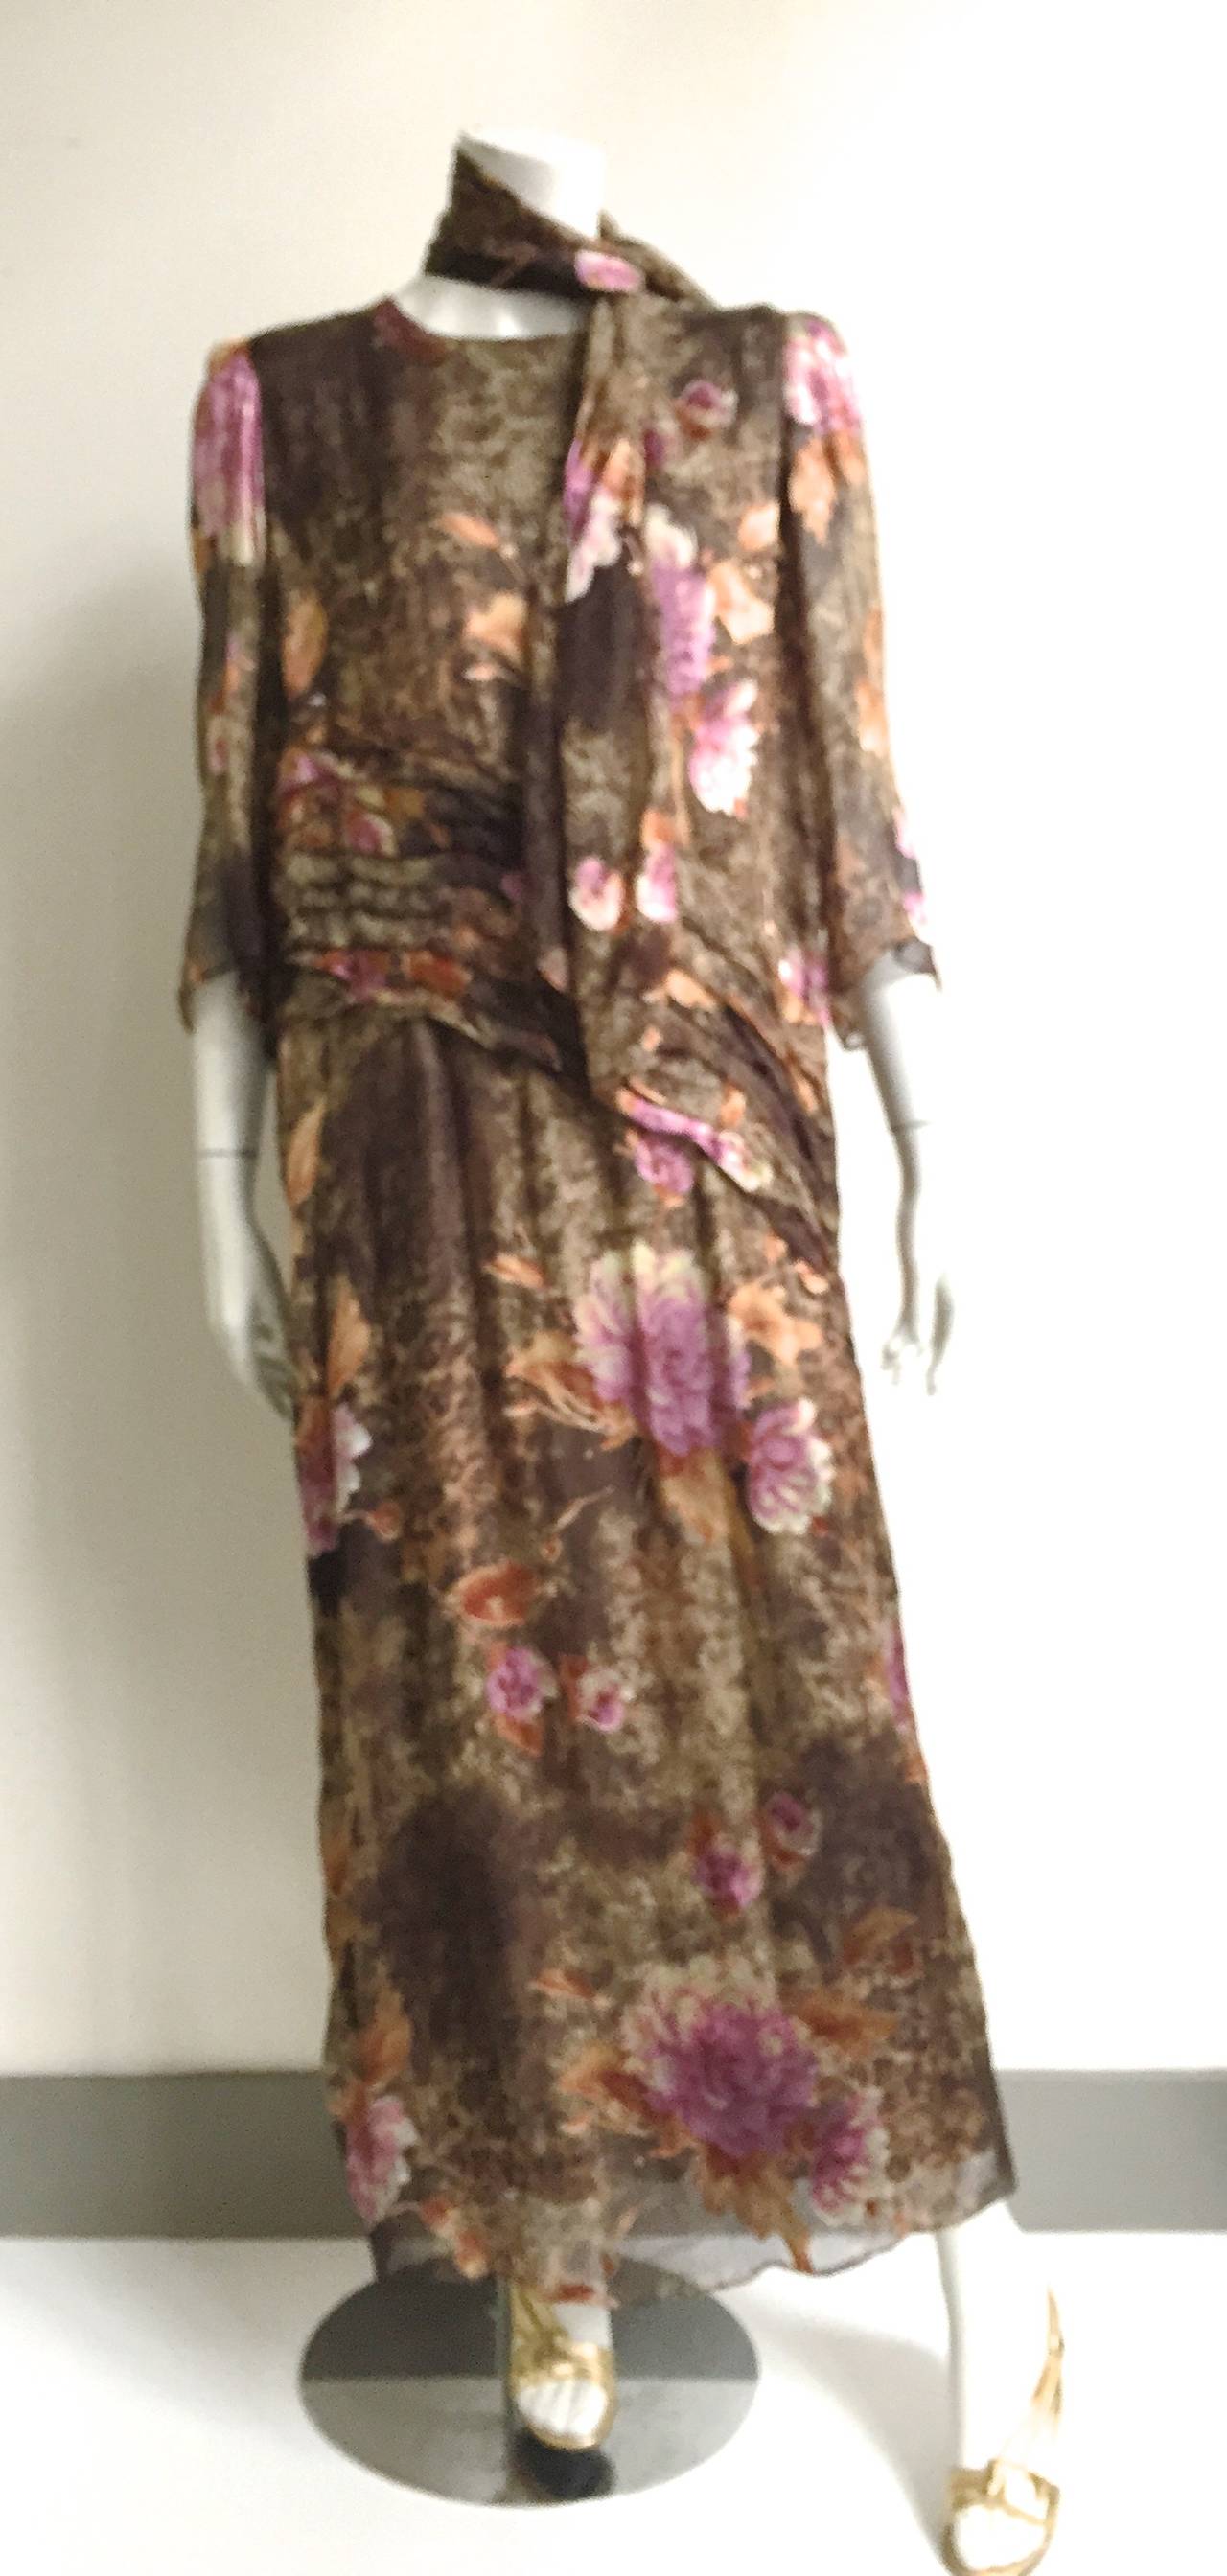 Pierre Cardin 70s silk floral pattern long dress with matching scarf is a size large (size 14) but see measurements. In the photos I tied the scarf around neck and waist giving this dress different looks. This is a size large dress and when the